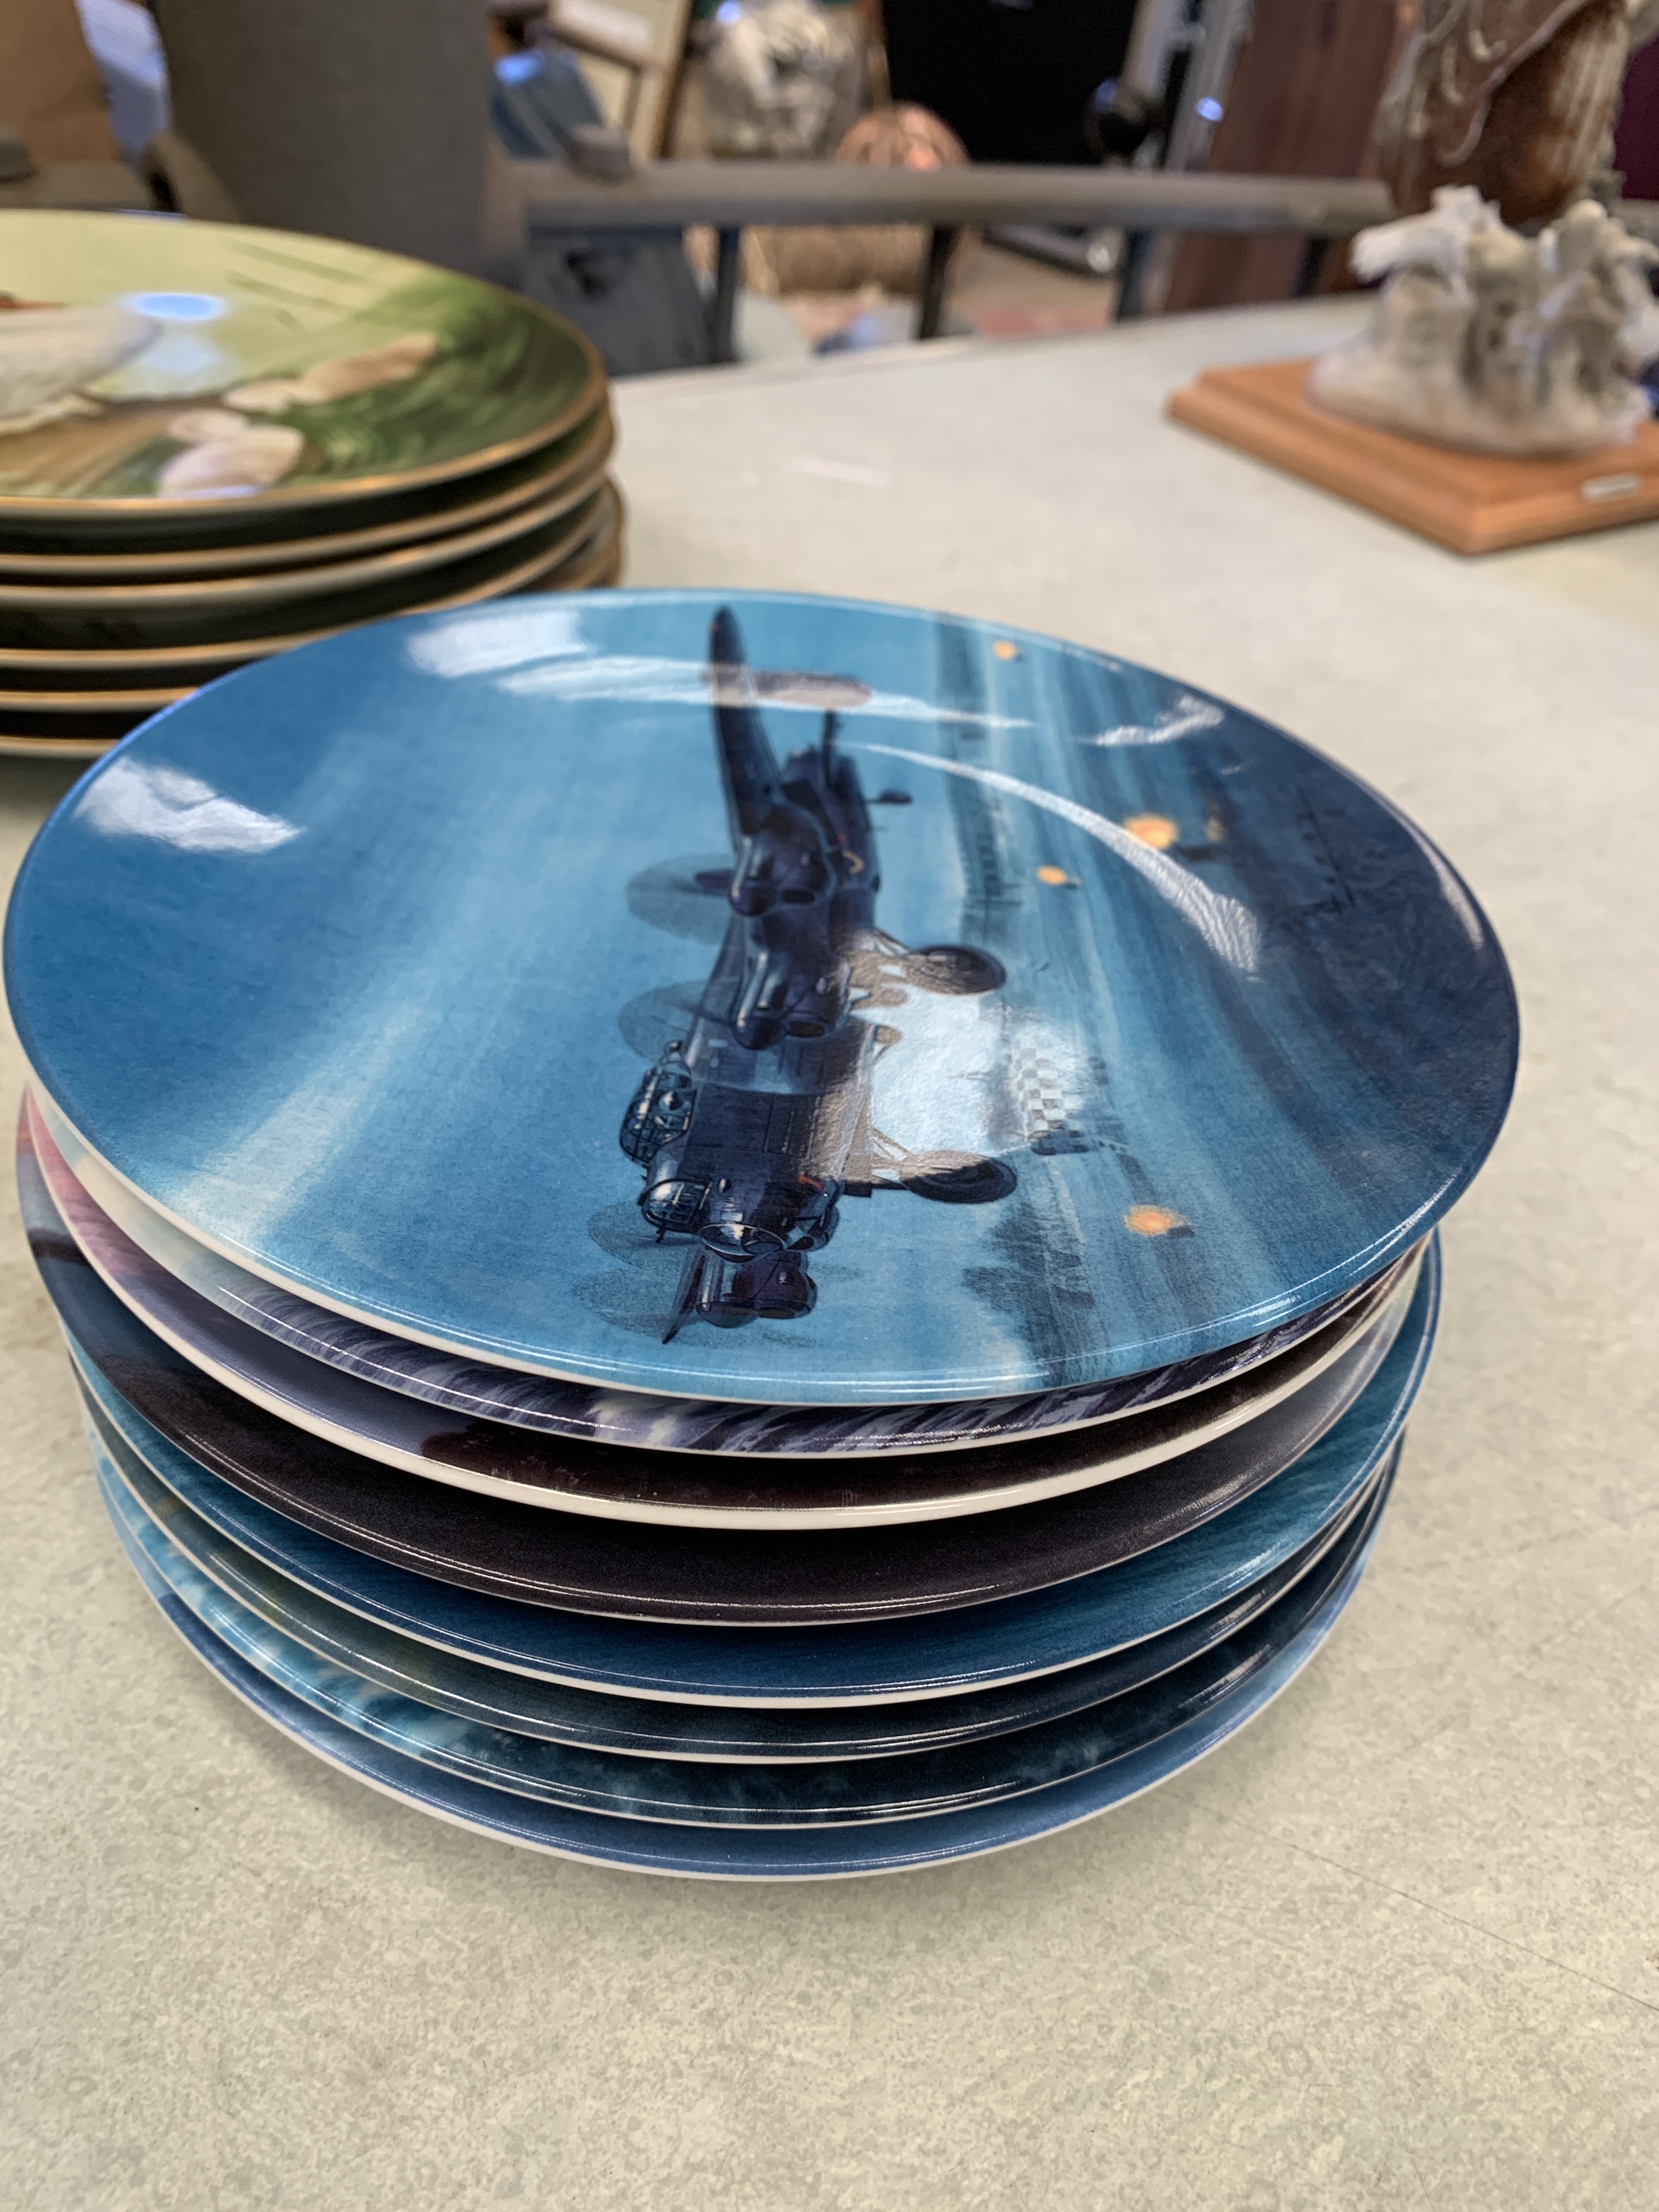 Royal Worcester Dambusters plates and Royal Doulton Spitfire plates - Image 4 of 4